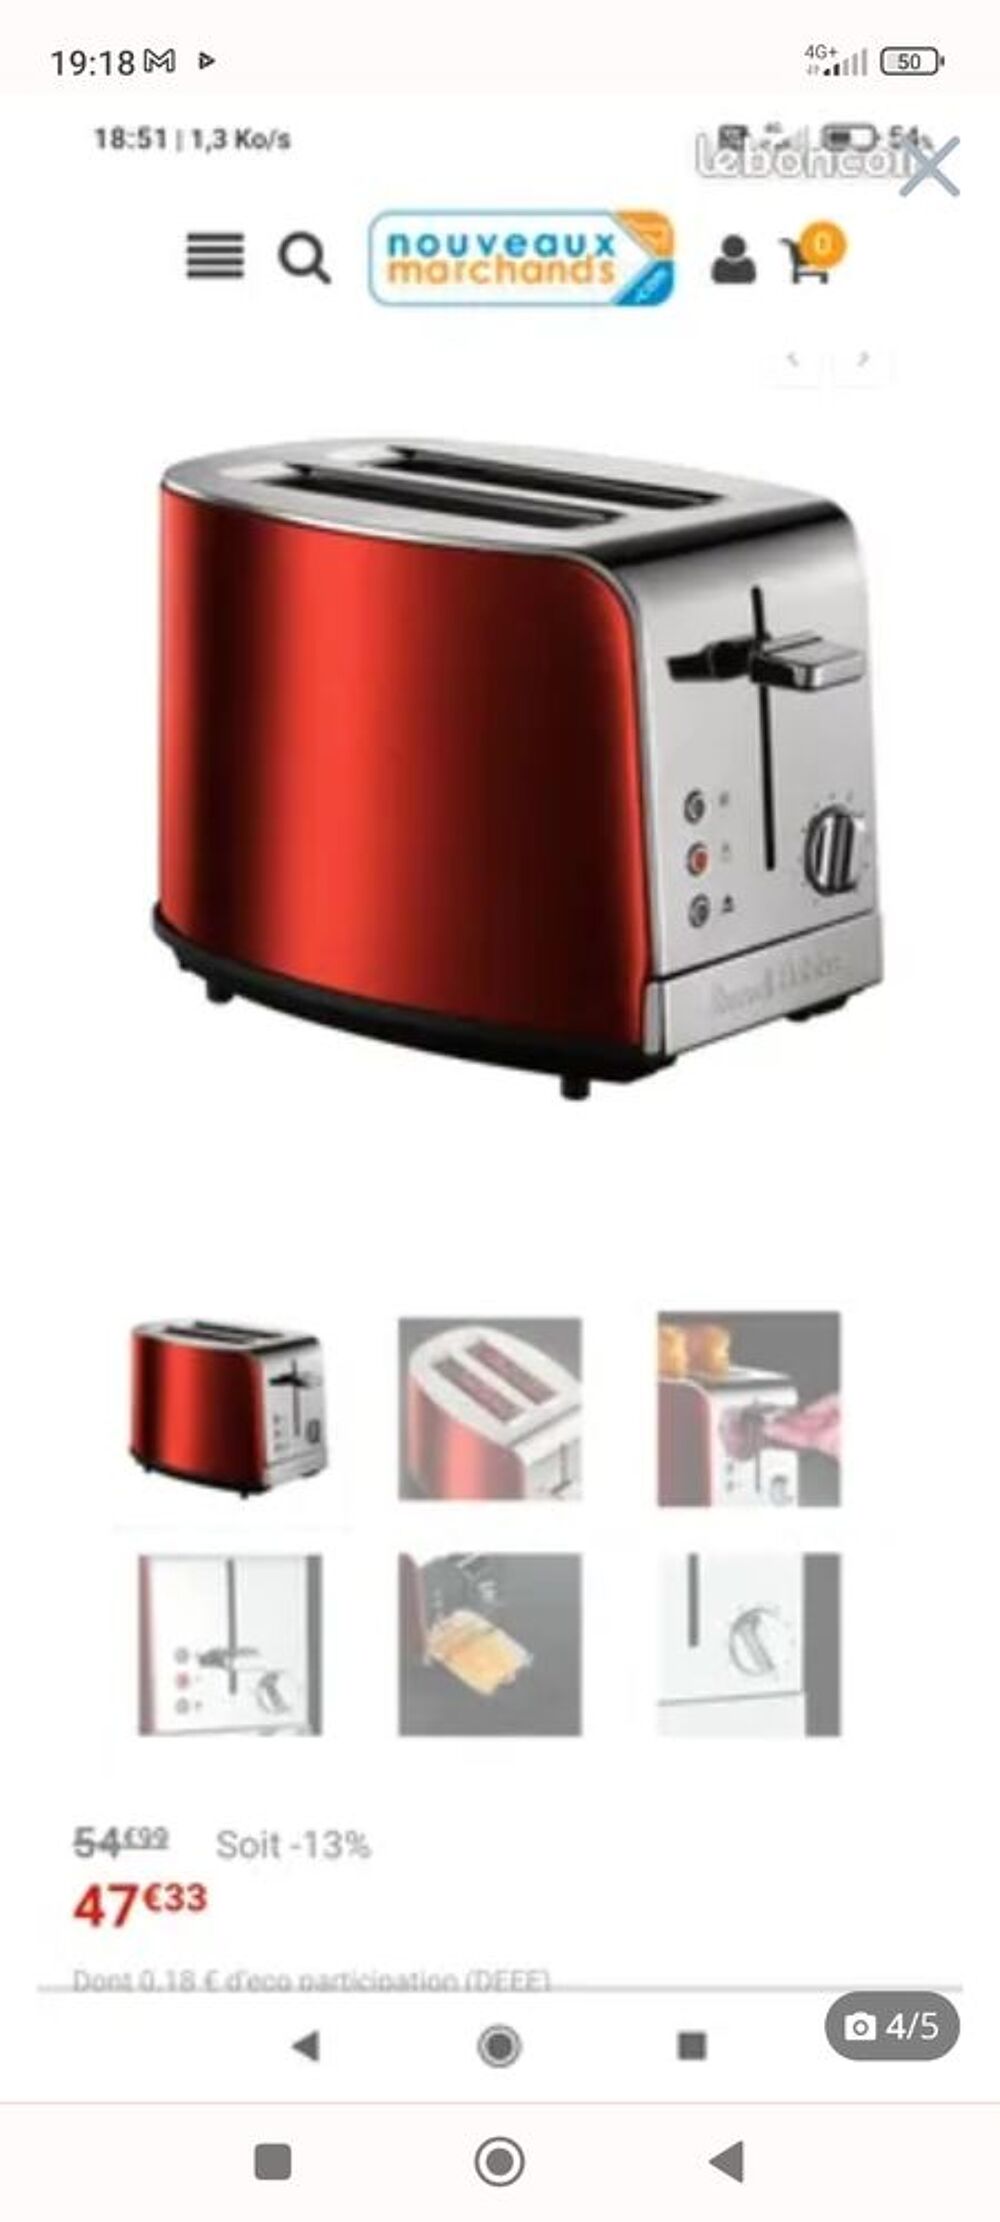 Grille pain Russell Hobbs Rouge Rubis/ Inox Bross&eacute; Electromnager